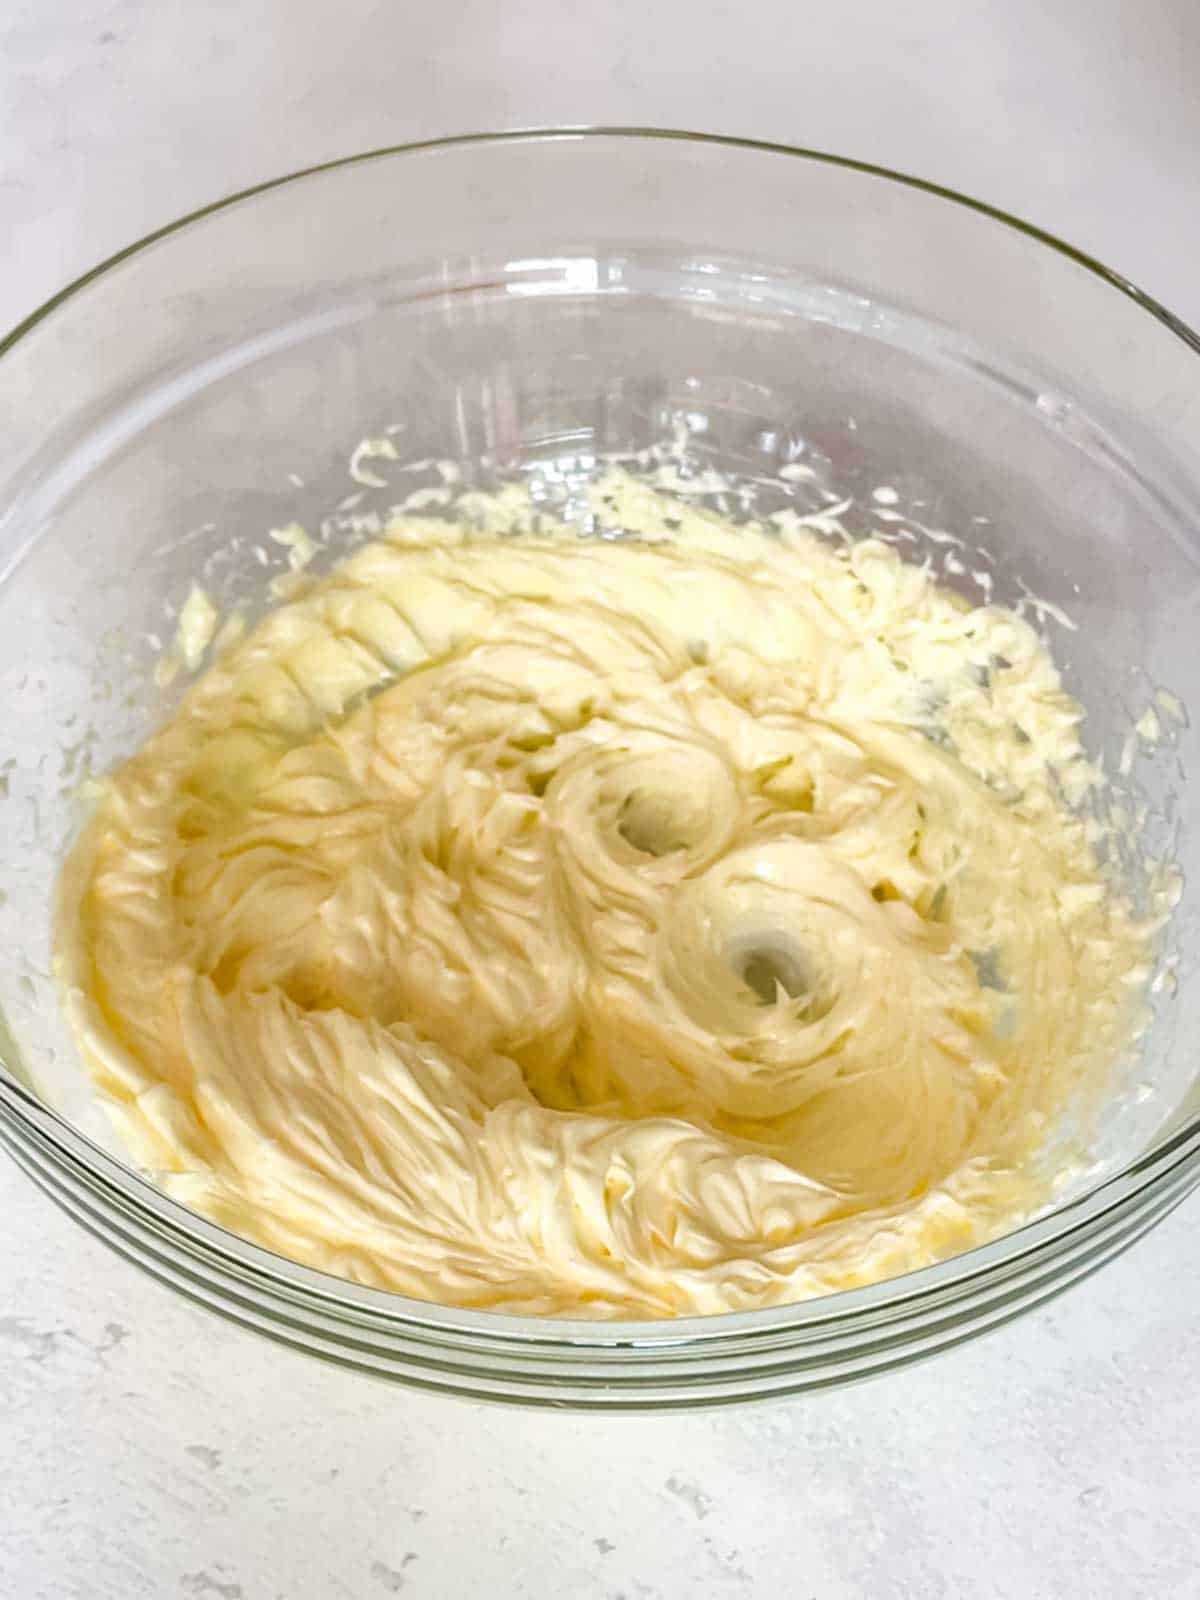 Creamed butter in a bowl